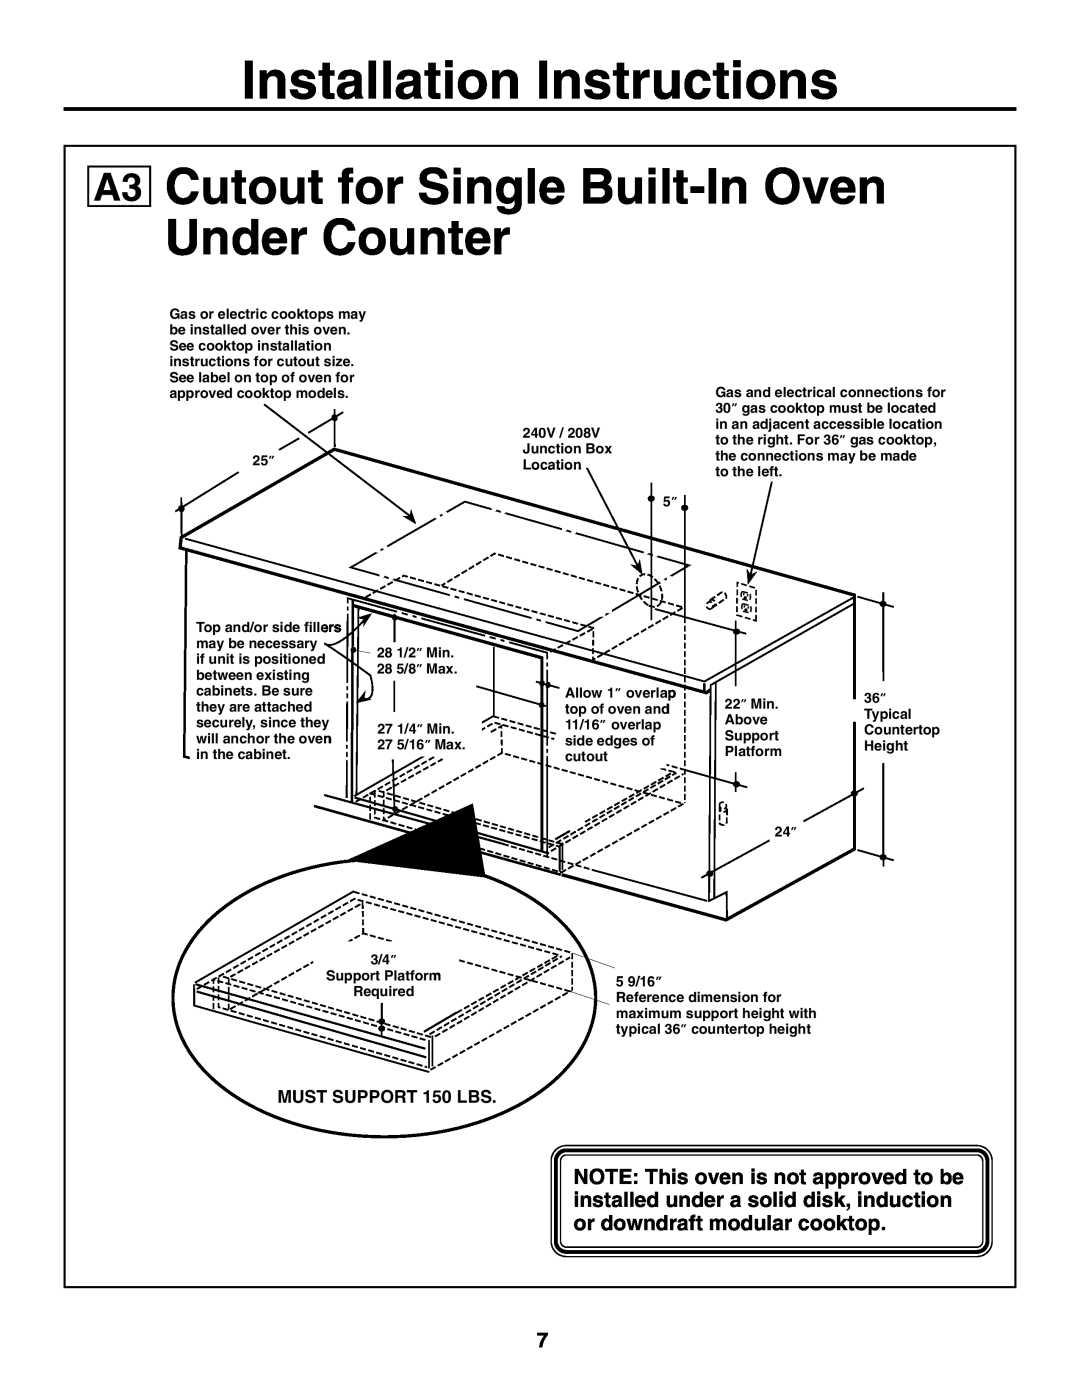 GE JTP20 Cutout for Single Built-In Oven Under Counter, Installation Instructions, MUST SUPPORT 150 LBS 